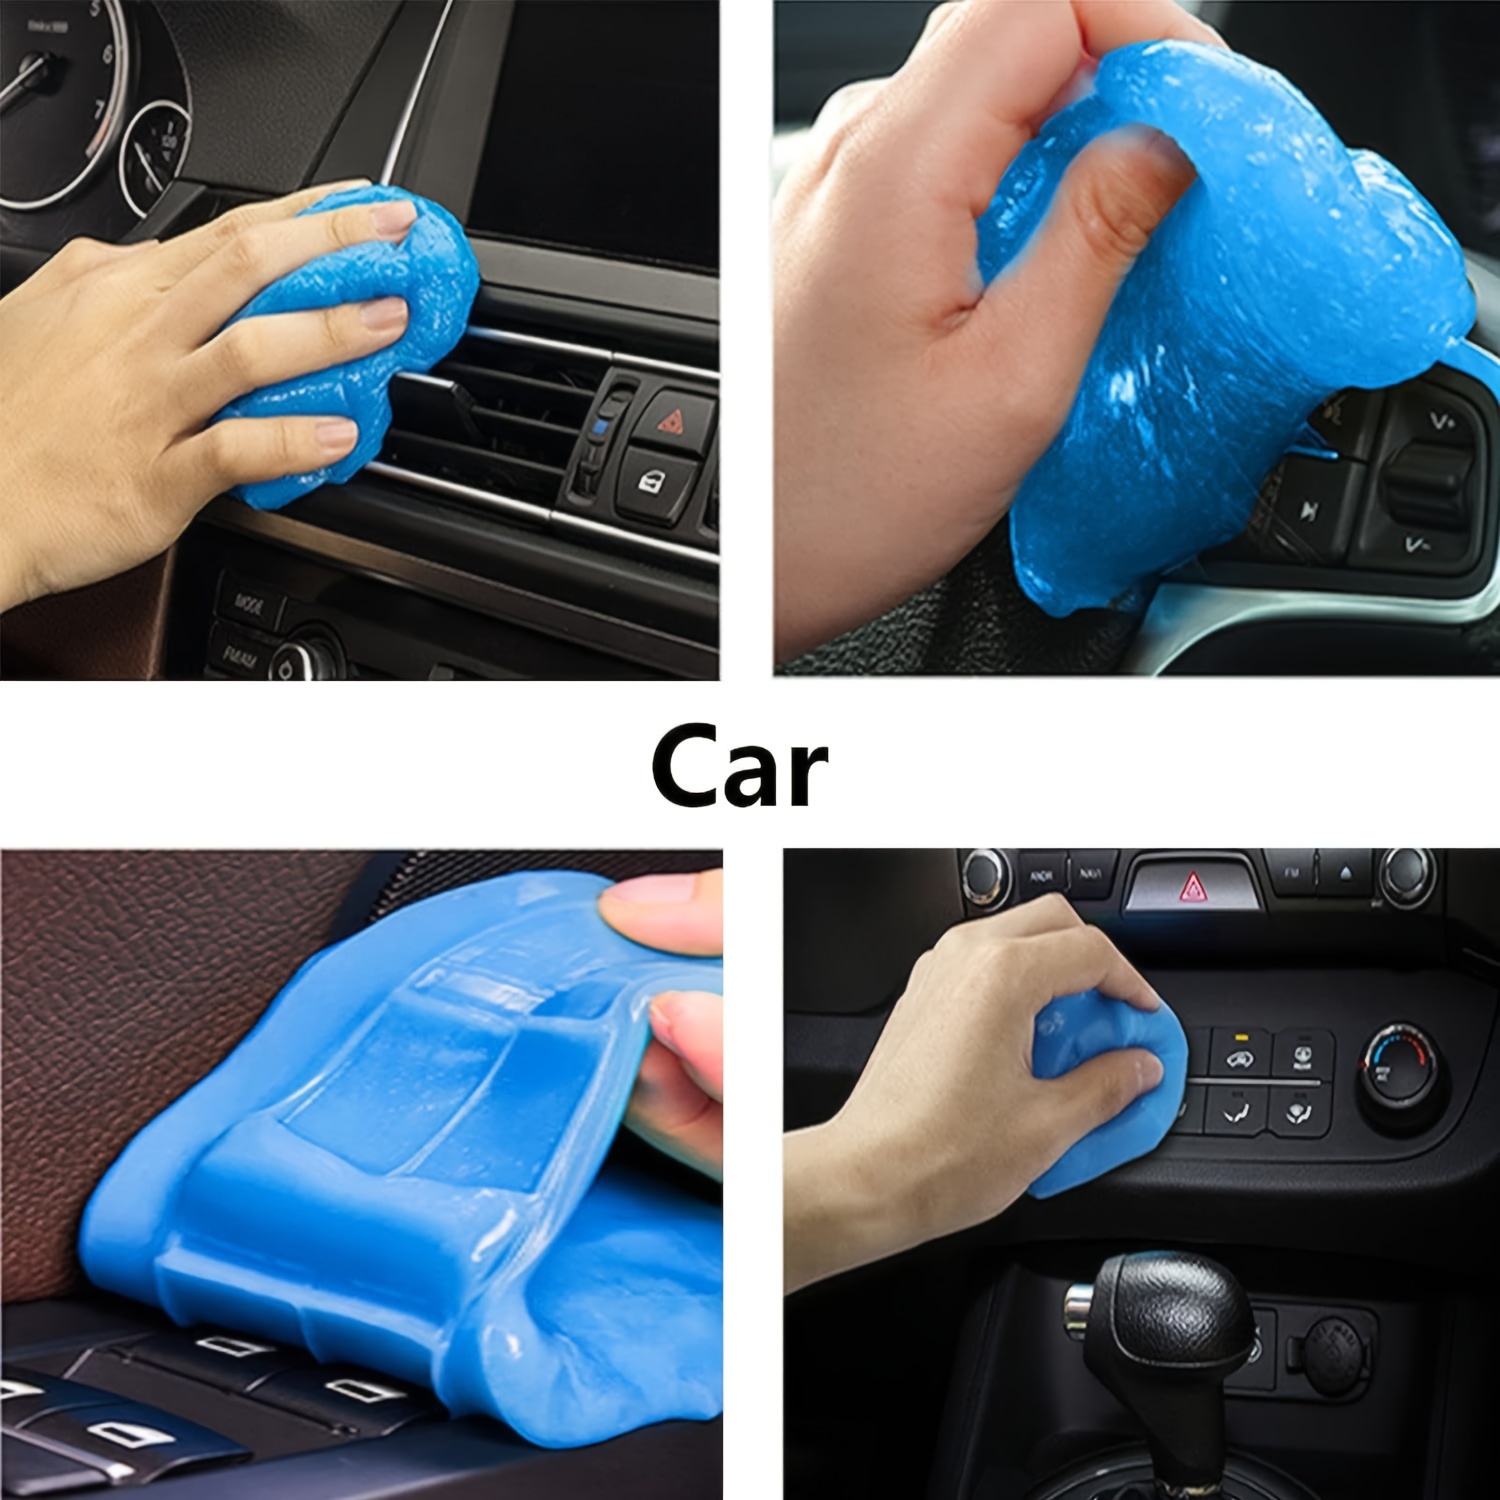 2pcs Multi-purpose Cleaning Gel Universal Car Crevice Cleaner For Car Air  Vent & Interior Detail Cleaning Mud Can Be Used For Keyboard, Computer